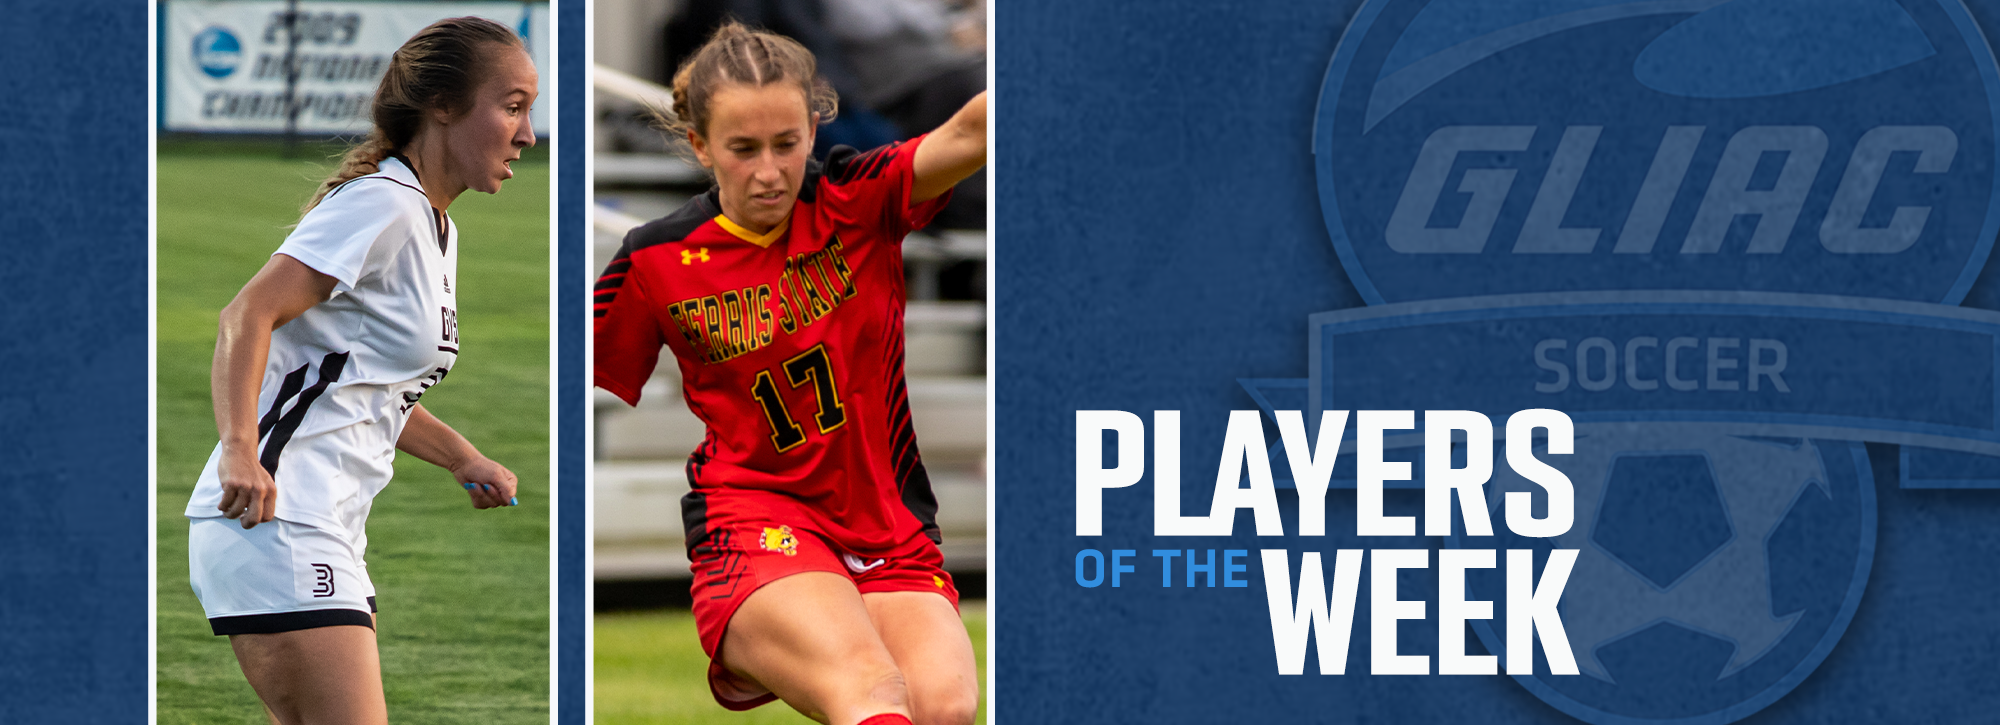 GVSU's Reid and FSU's Cole earn women's soccer player of the week recognition